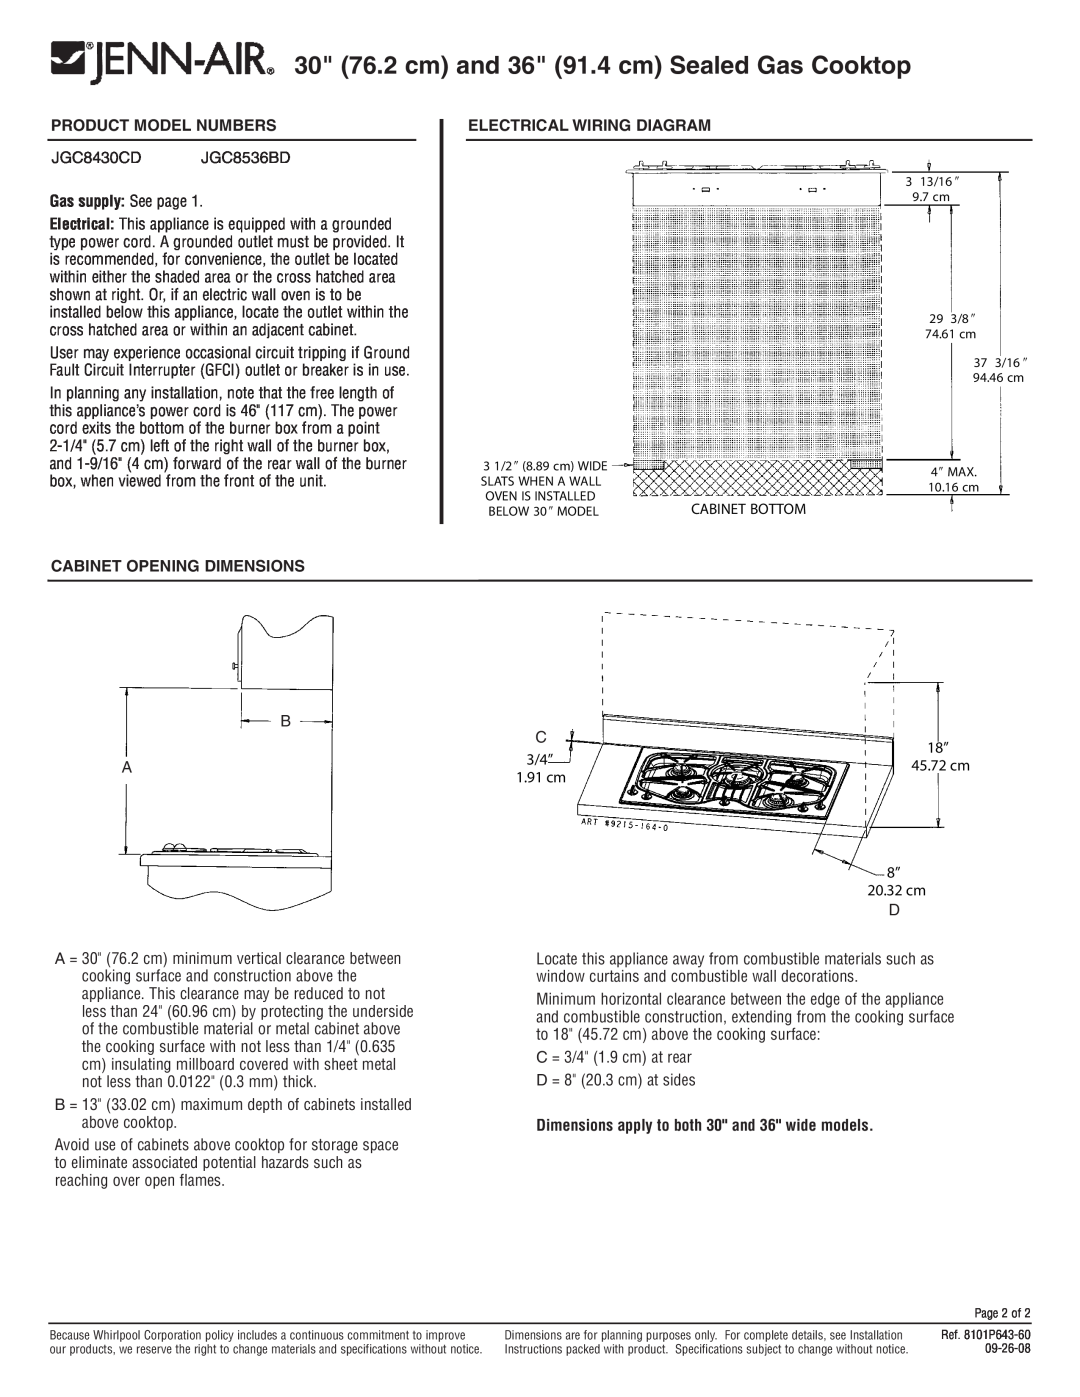 Jenn-Air JGC8430CD Gas supply See page, Cabinet Opening Dimensions, Electrical Wiring Diagram, Product Model Numbers 